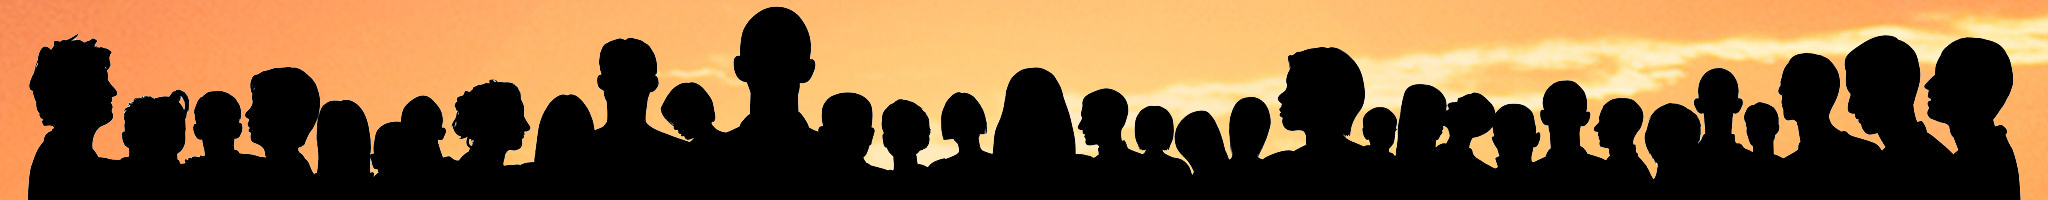 Large group of people silhouetted against a yellow and orange sunset.